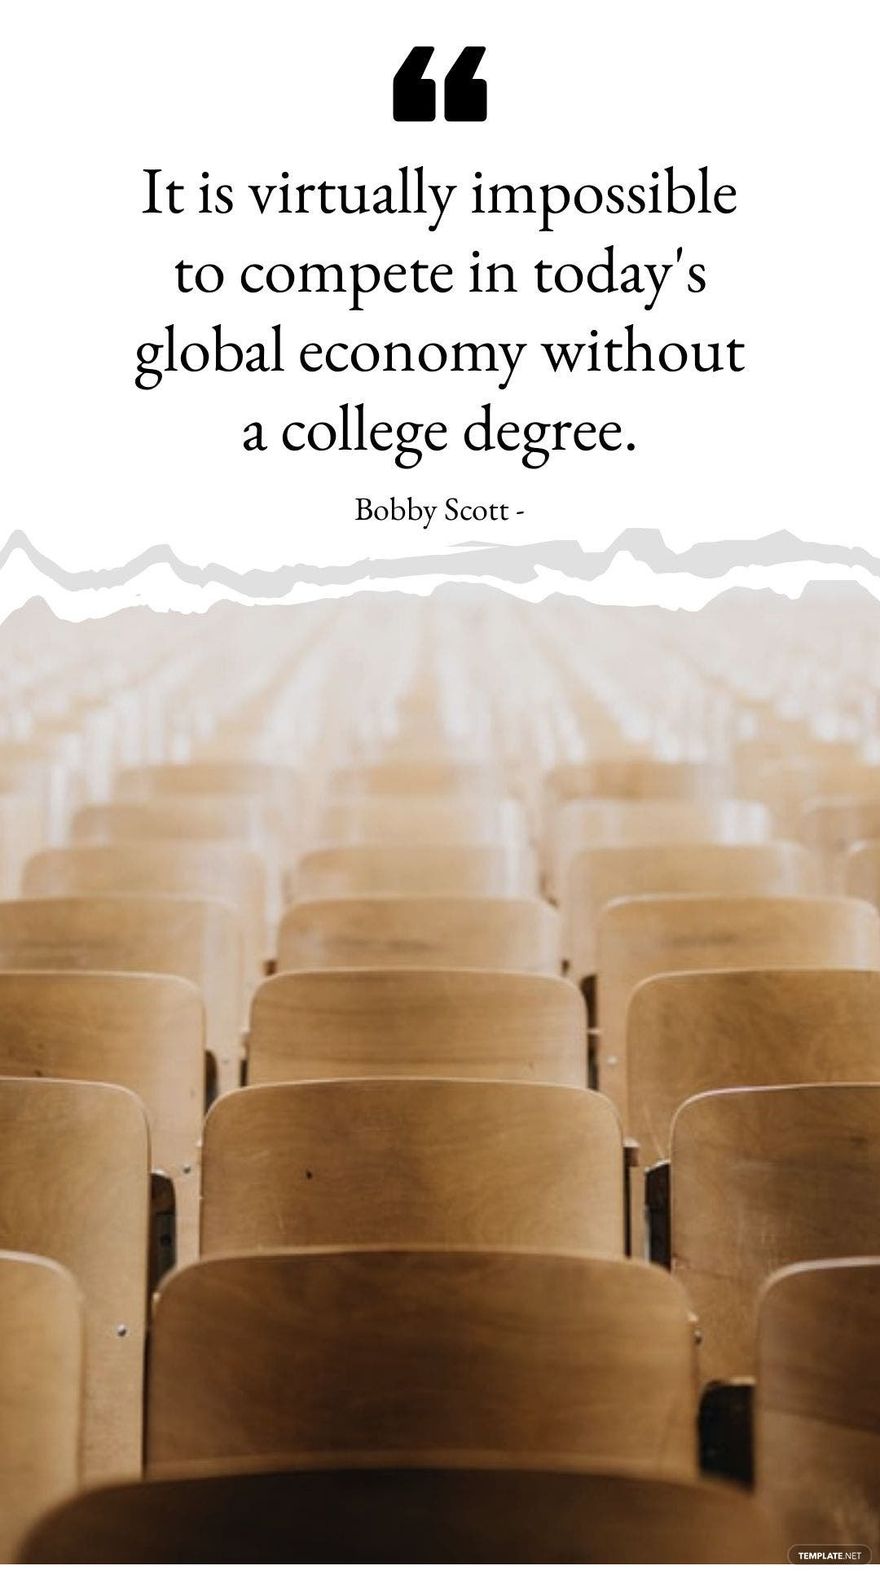 Bobby Scott - It is virtually impossible to compete in today's global economy without a college degree.